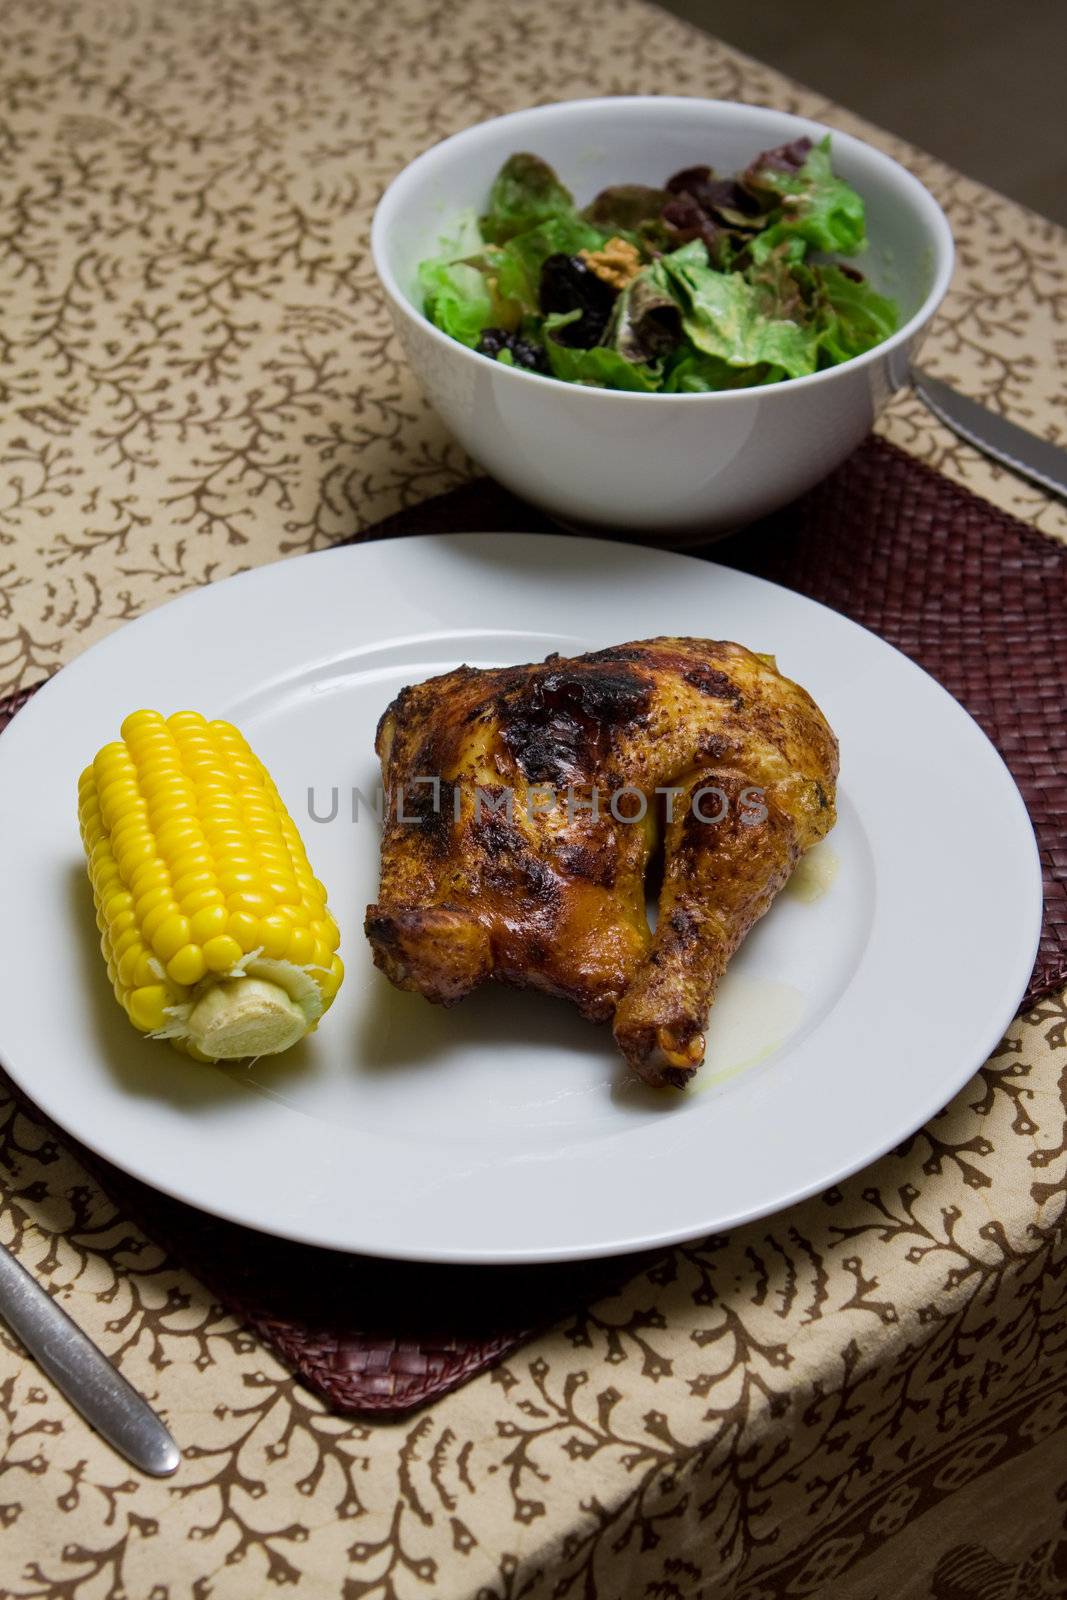 Plate of roast chicken with corn, salad and red wine